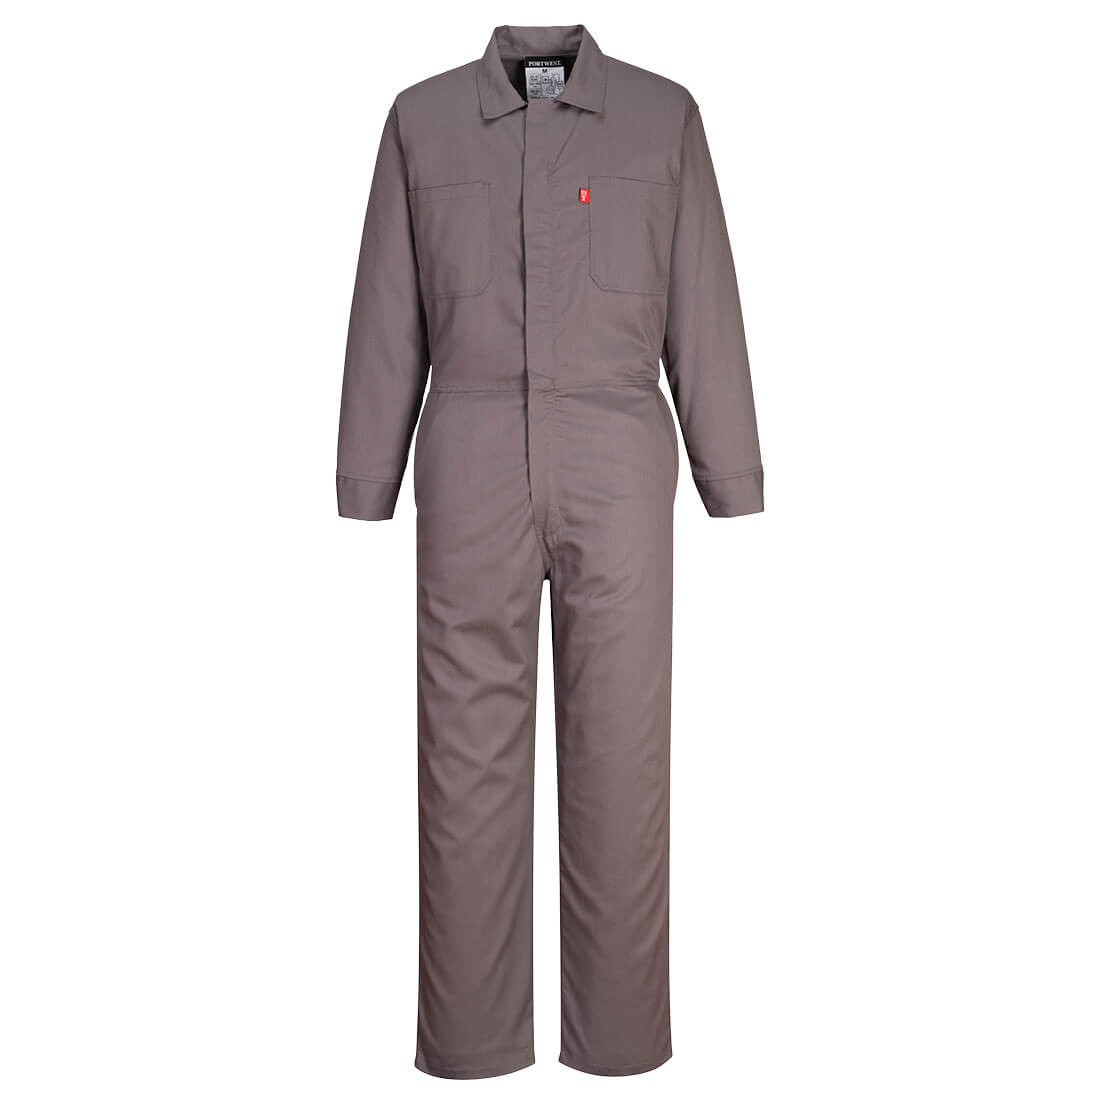 UFR87 Portwest® Bizflame® 88/12 FR/AR Classic Coverall - Gray